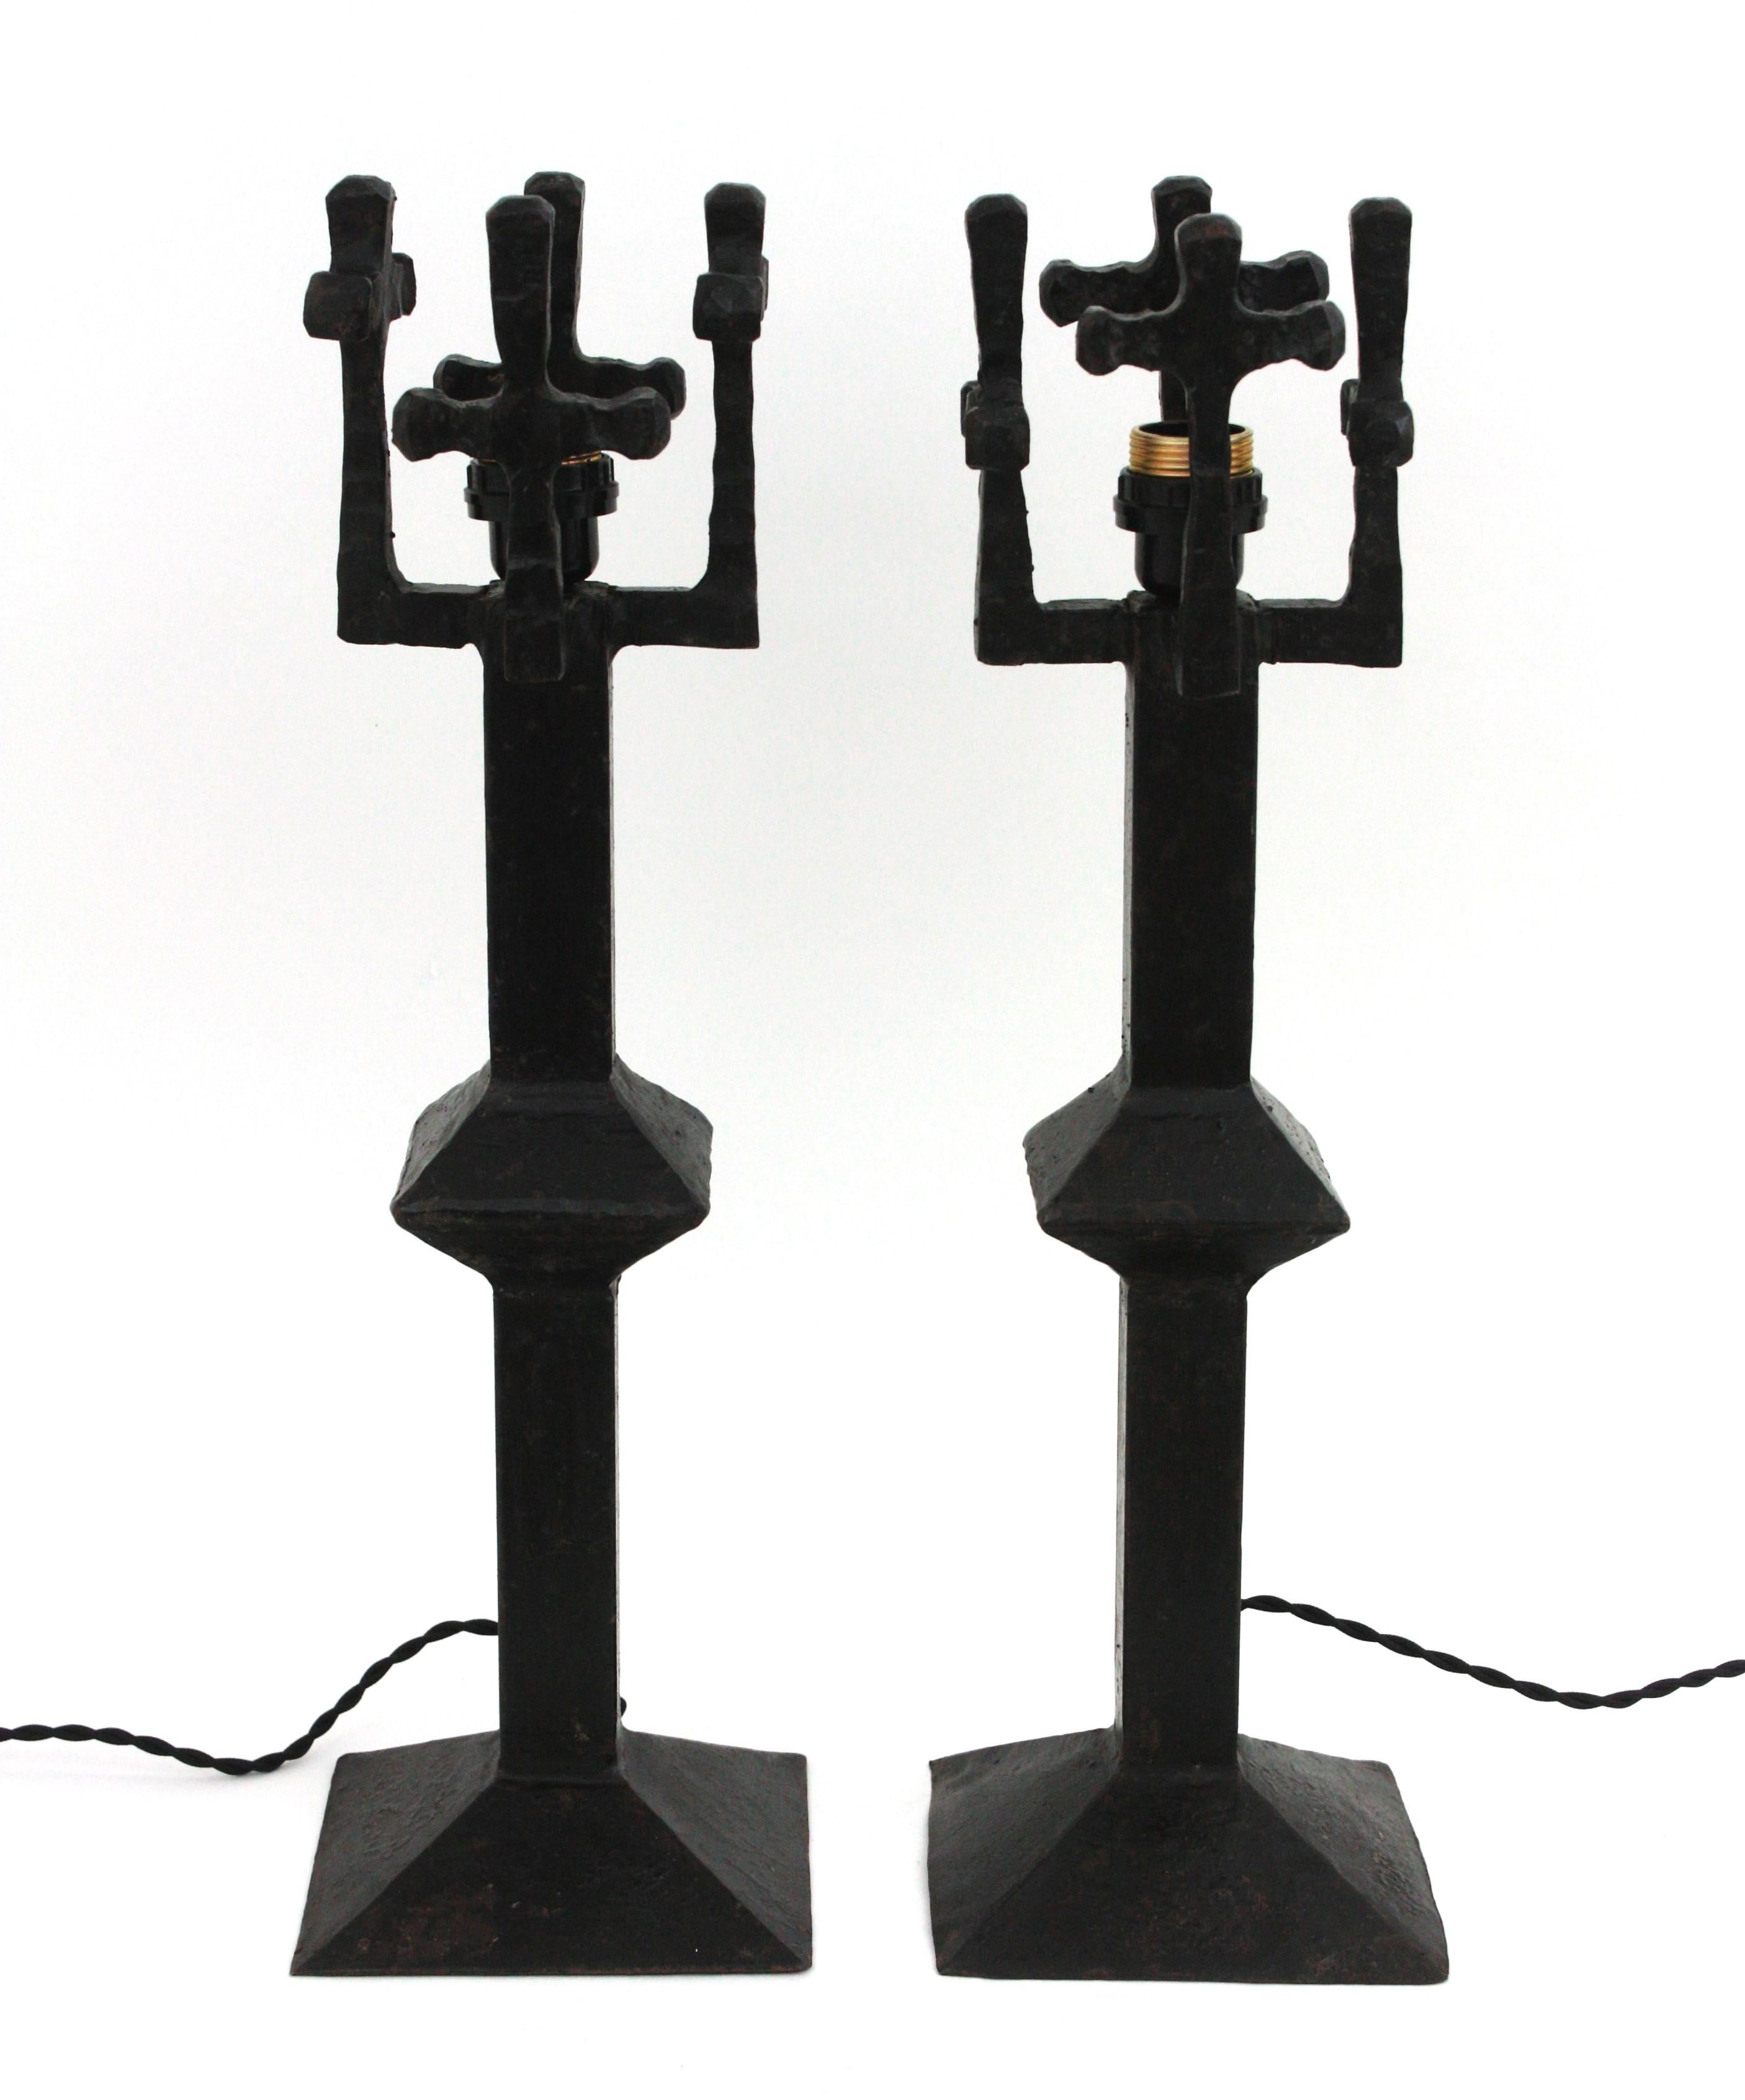 Pair of Iron Brutalist Table Lamps, France, 1950s.
Hand forged Iron table lamps with cross details on the top and squared bases.
Solid structure and beautiful construction.
To be used with or without lampshades-choosing an eye-catching bulb as shown